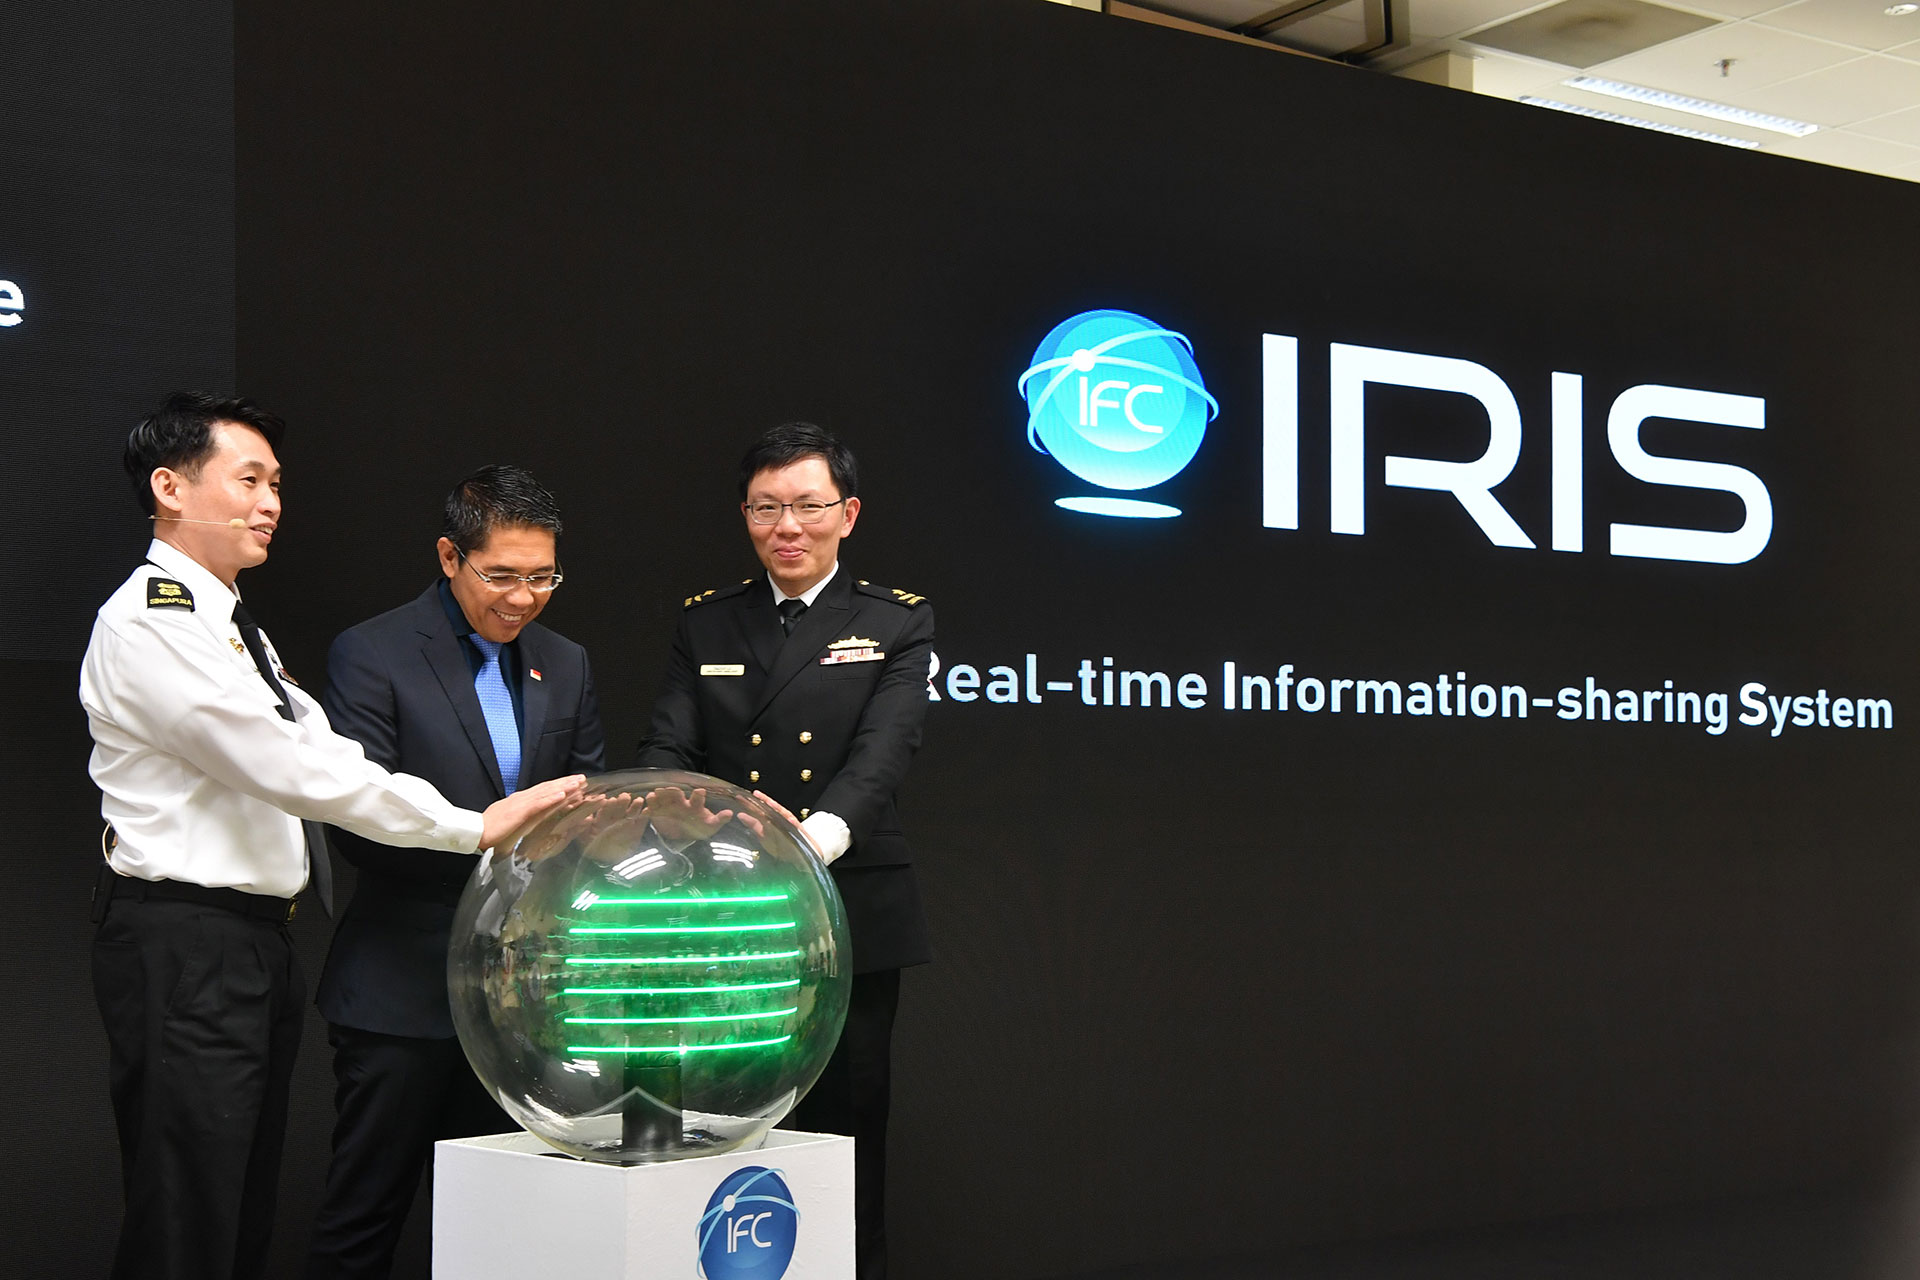 Dr Maliki launching the IFC Real-time Information-sharing System (IRIS) at the RSN's IFC 10th anniversary celebrations.